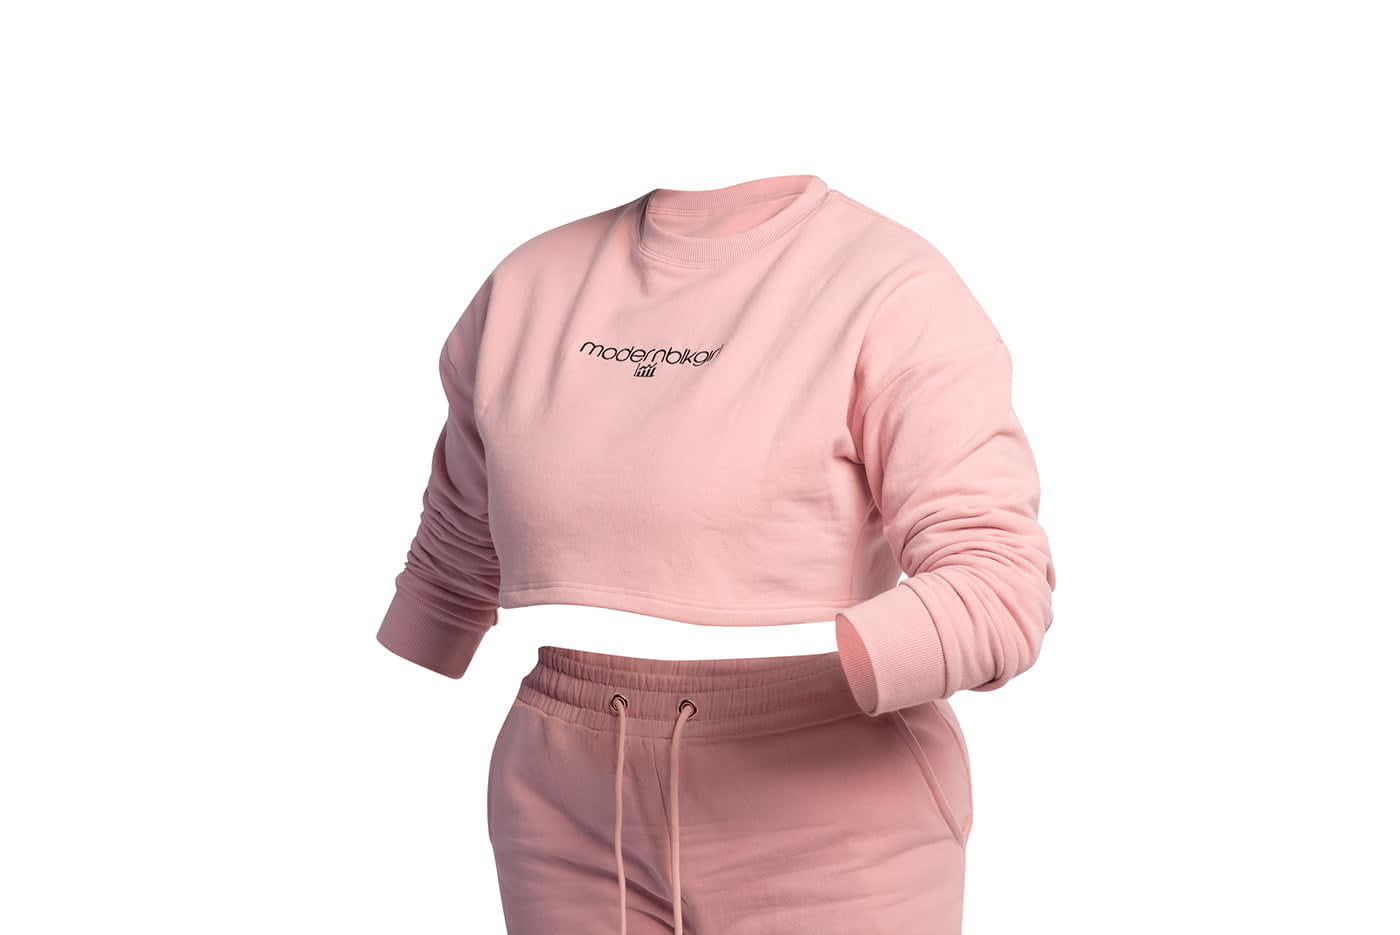 Ghost Mannequin clipping Path Service After Image 2